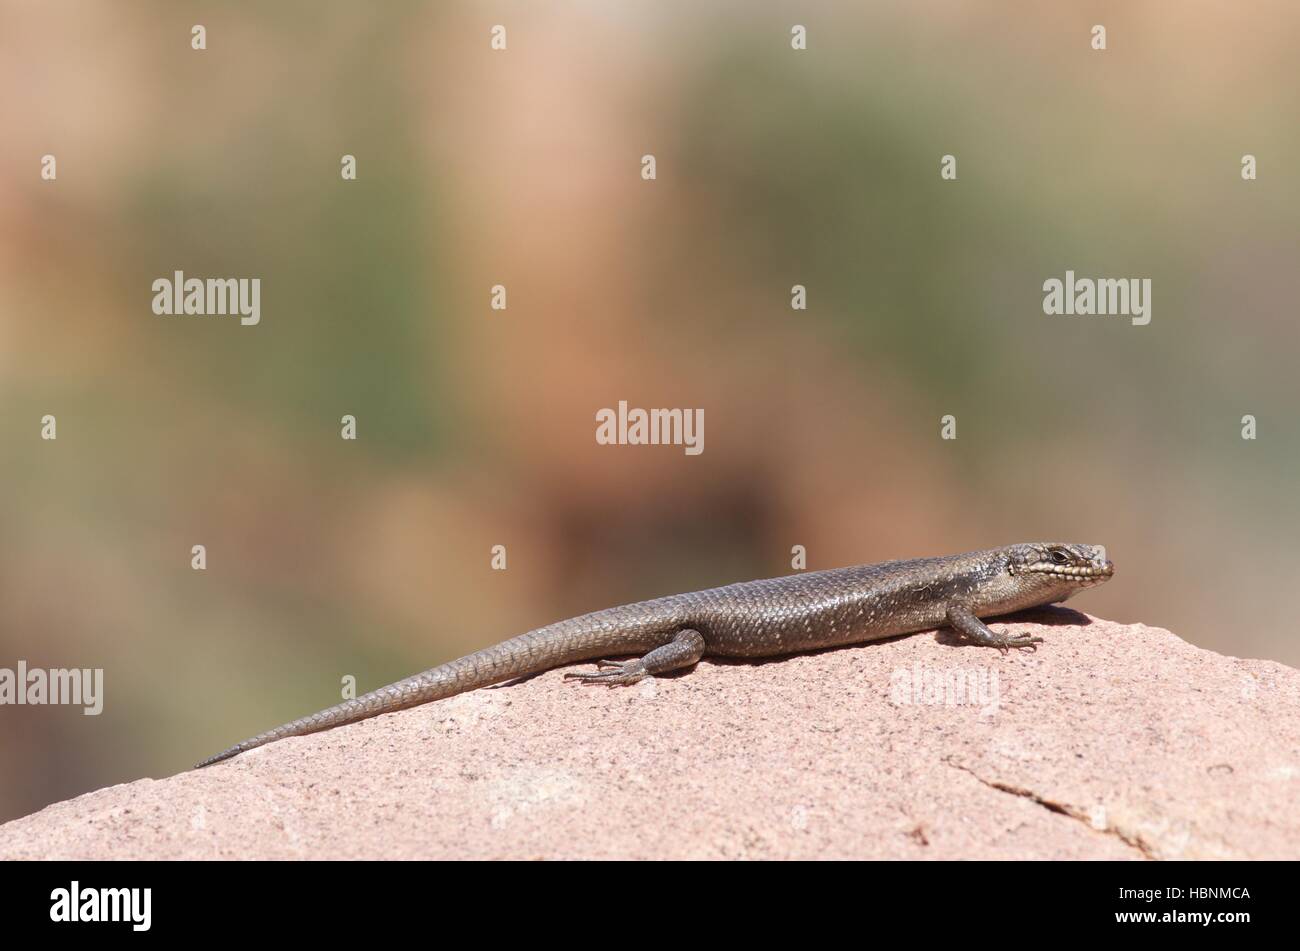 A Tree Skink or Rock Skink (Egernia striolata) stretched across a boulder at Telowie Gorge Conservation Park, South Australia Stock Photo